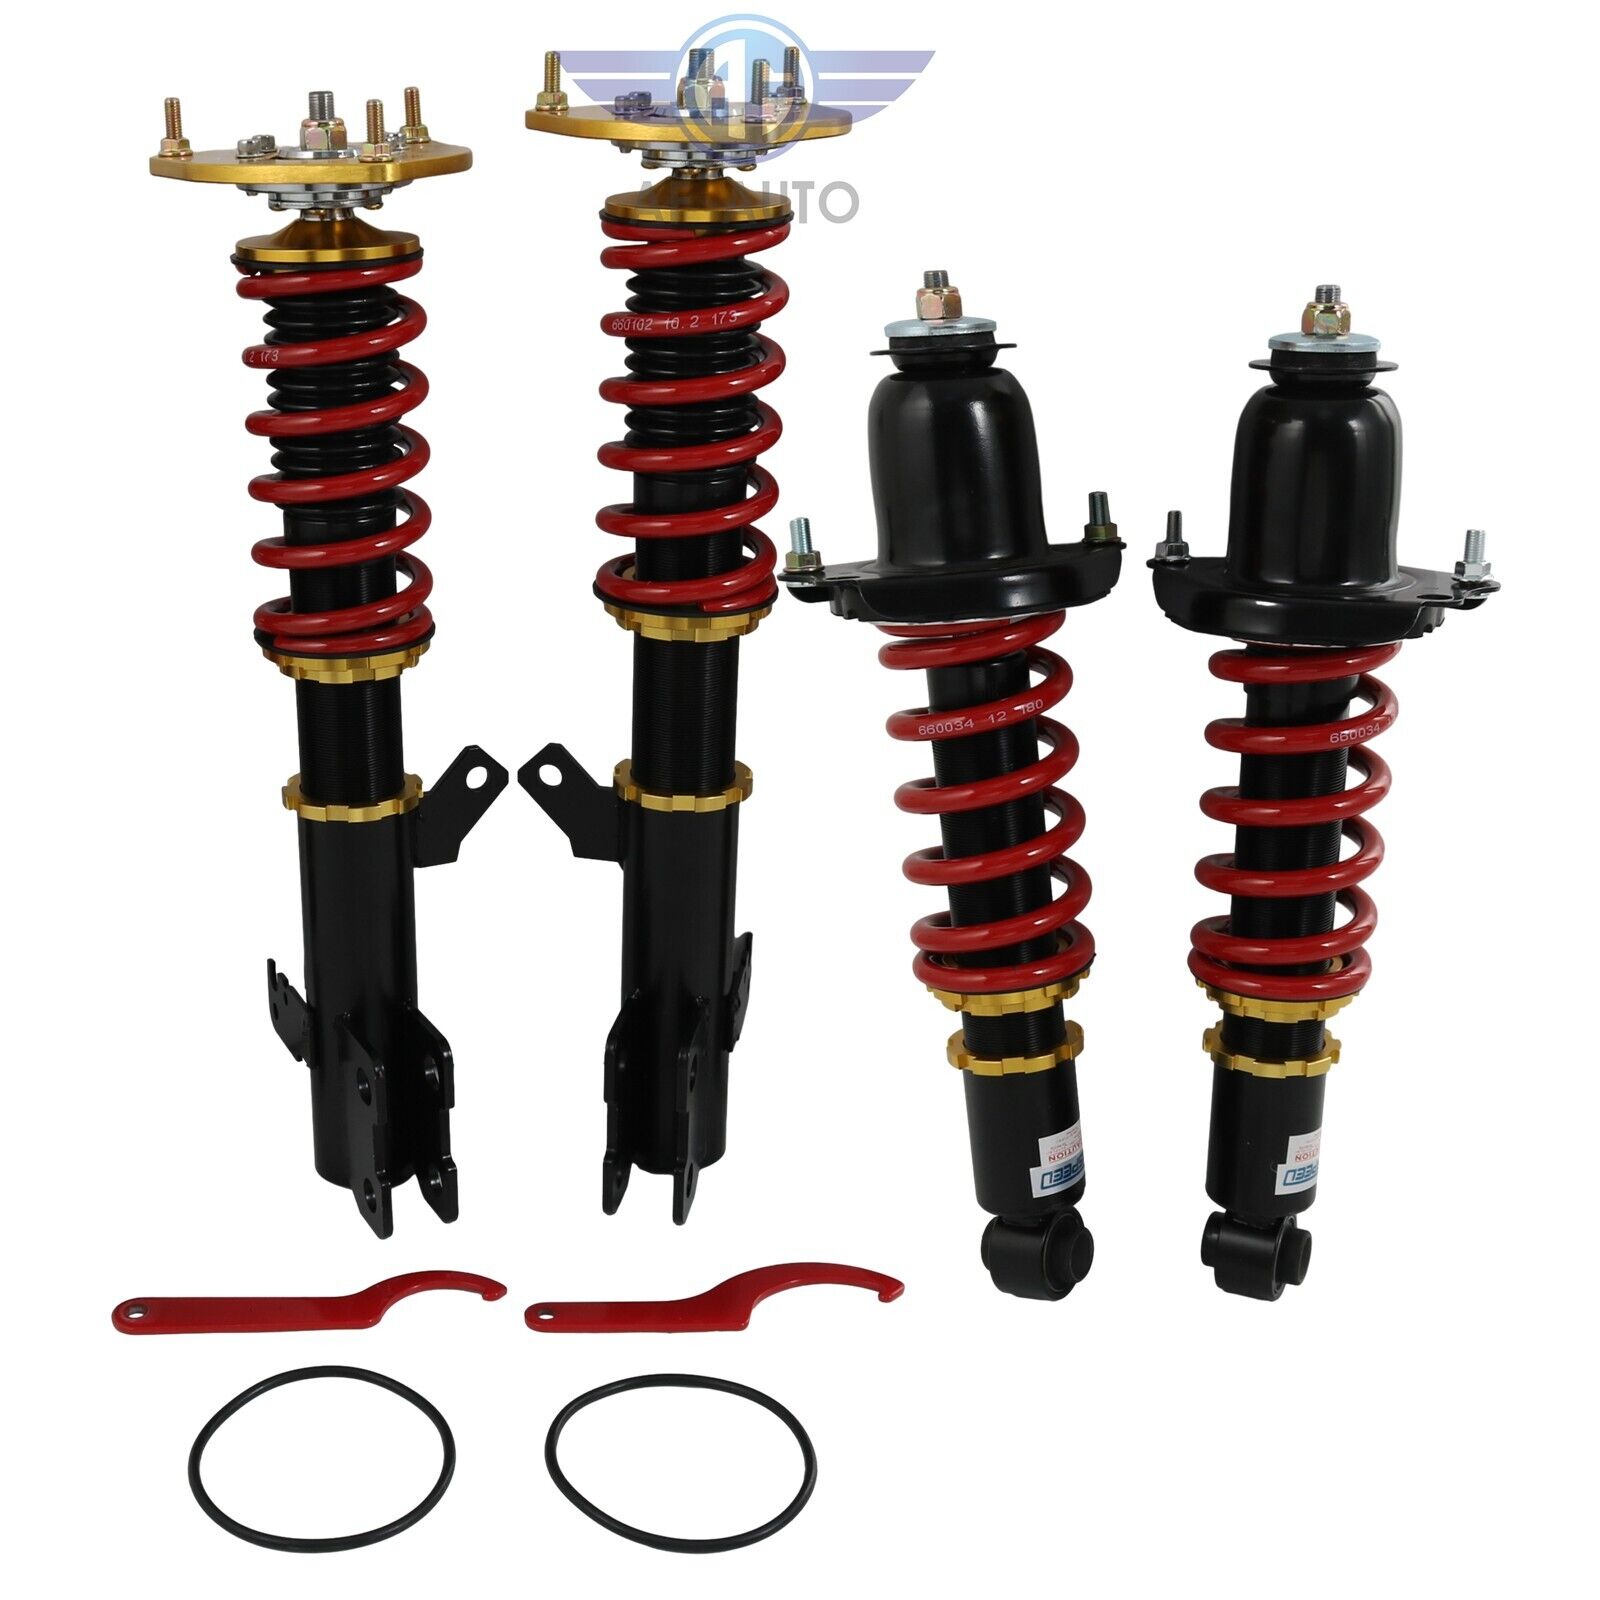 JDMSPEED Coilovers Lowering Kit For Toyota Corolla 03-08 Adjustable Height